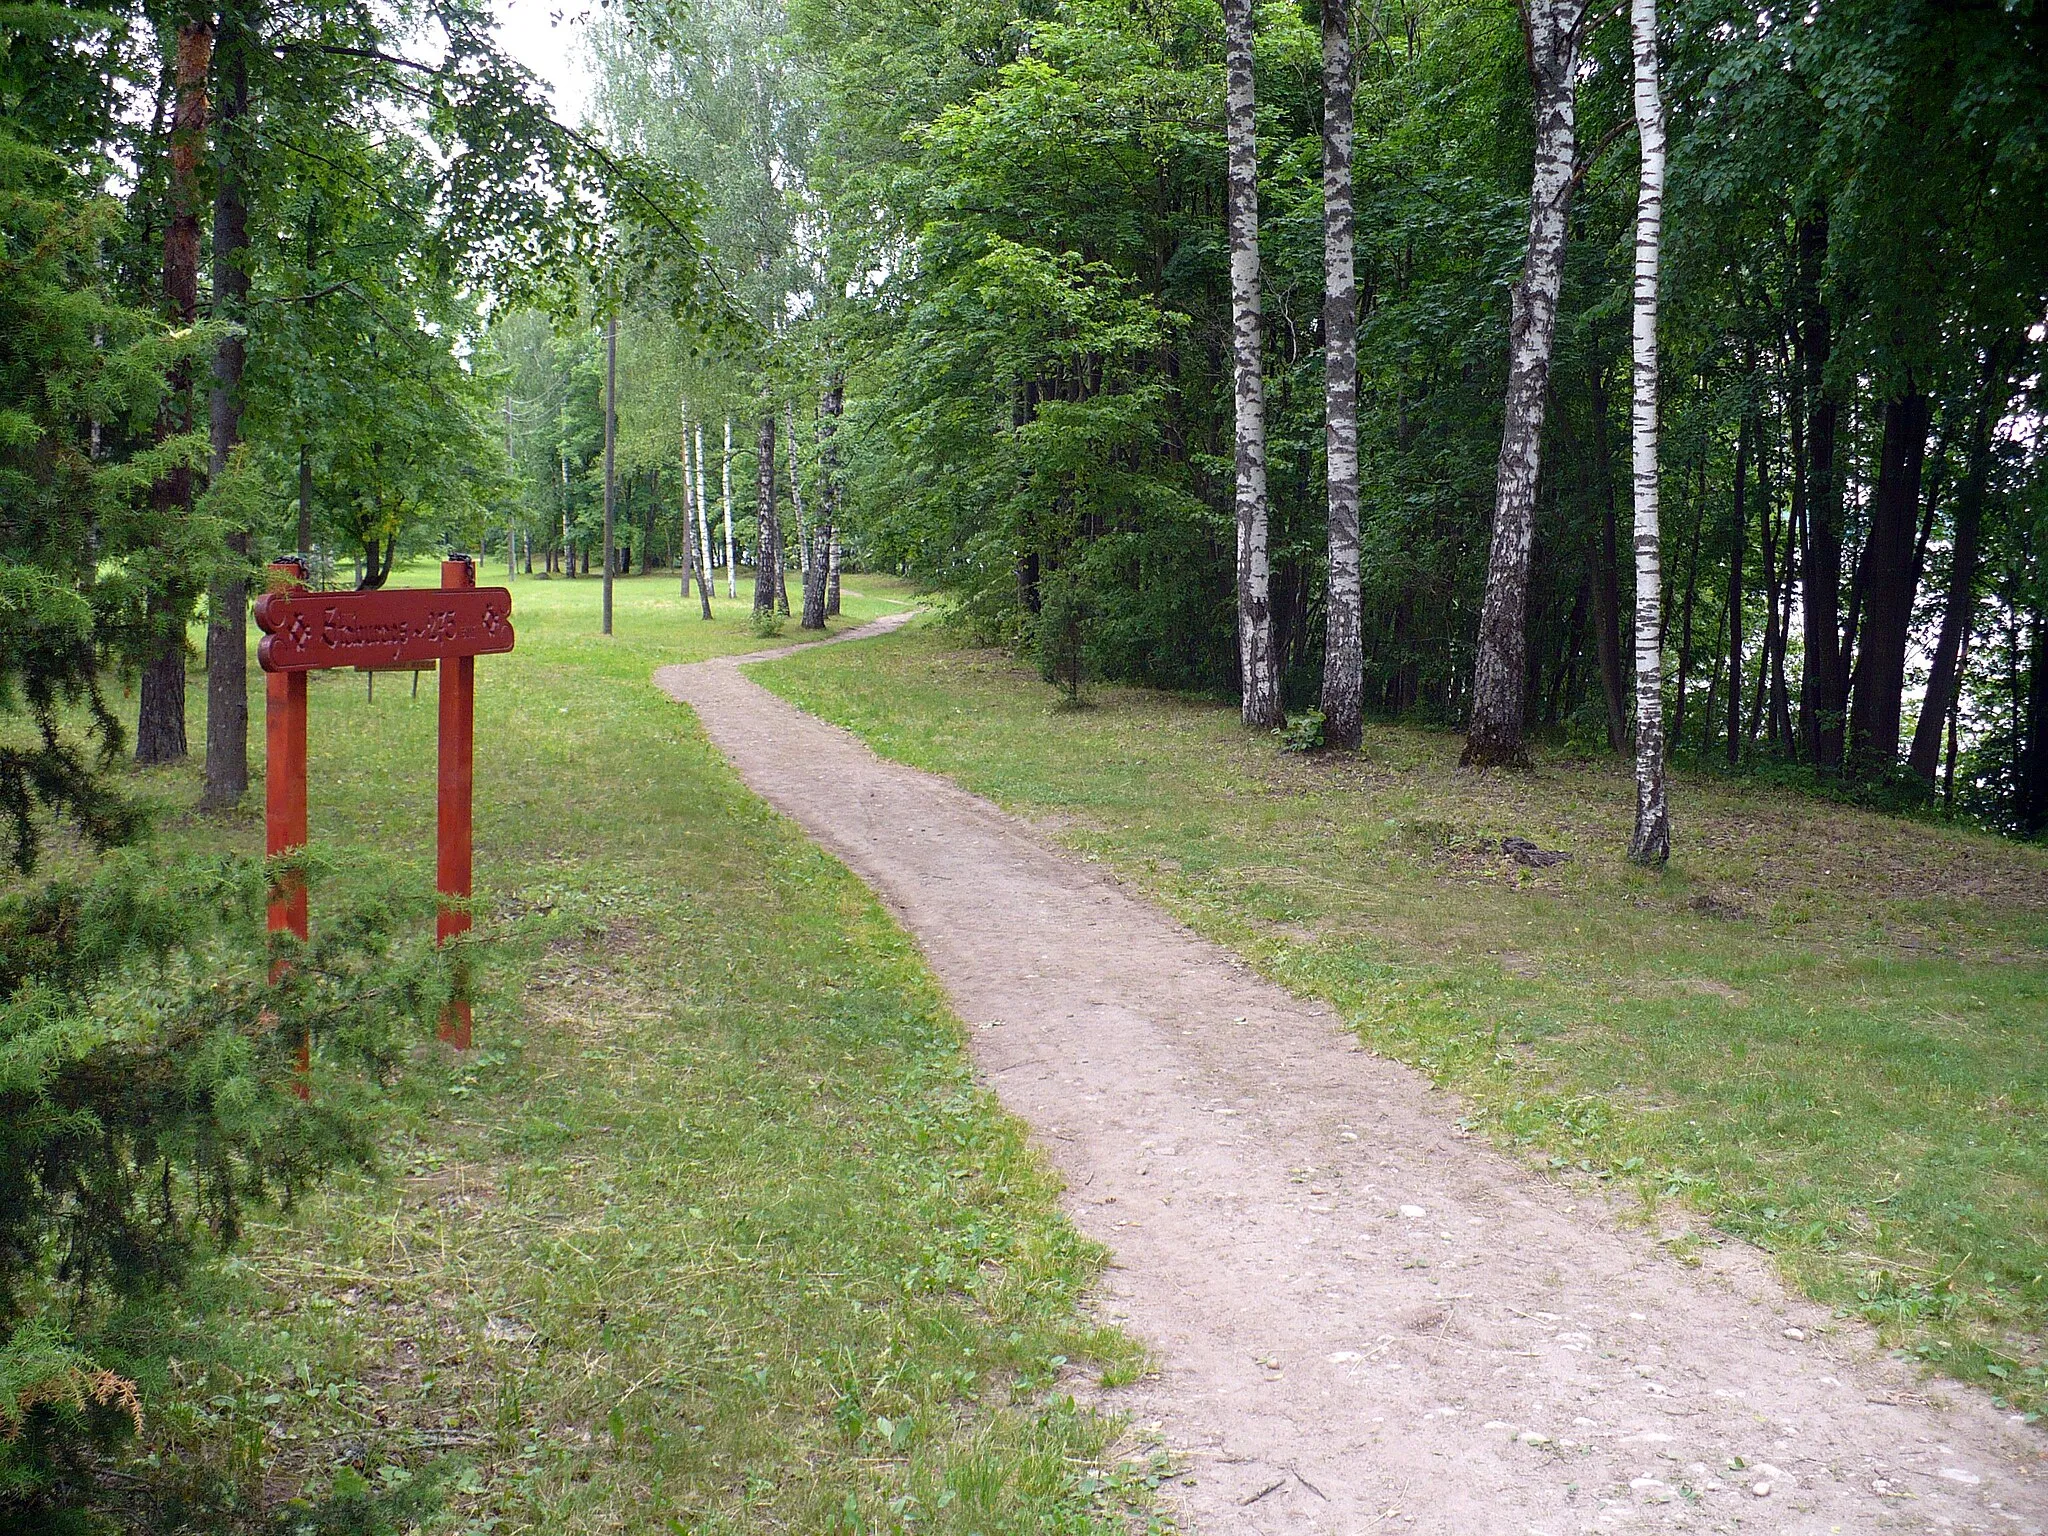 Photo showing: Entering the "Staburags rock" park. Text on sign: To Staburags ~275 steps. June, 2008.